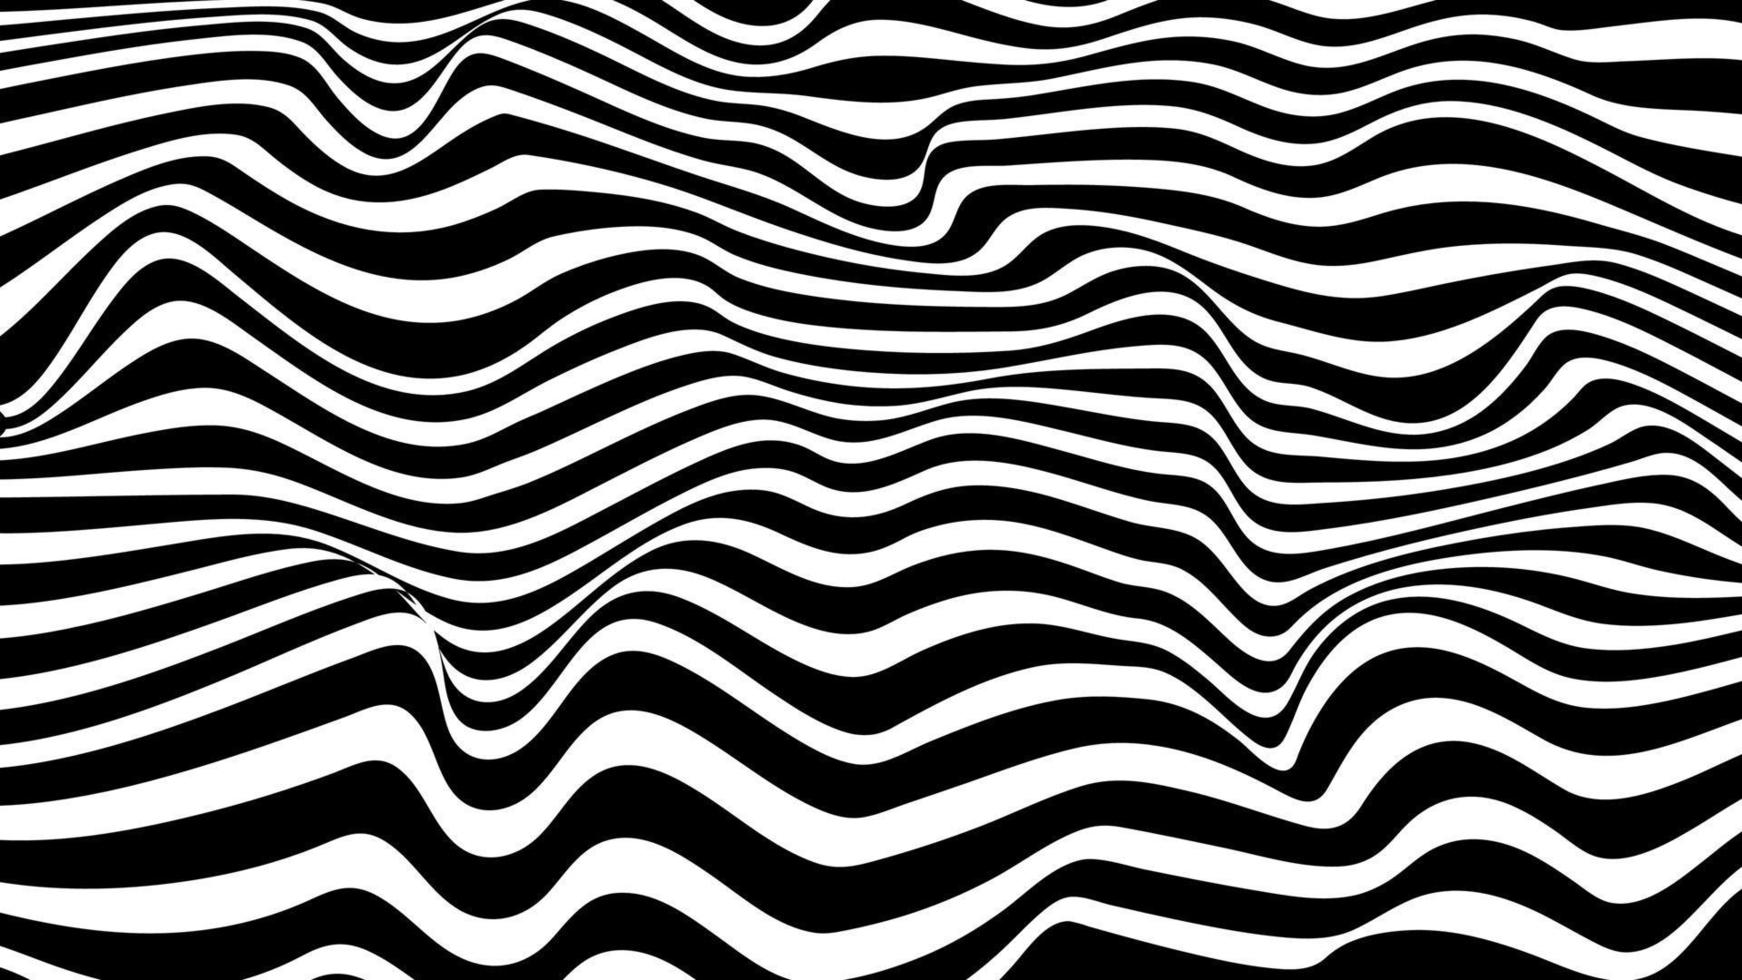 Zebra pattern wallpaper on wavy lines style. Black and white background. Illustion graphic. vector